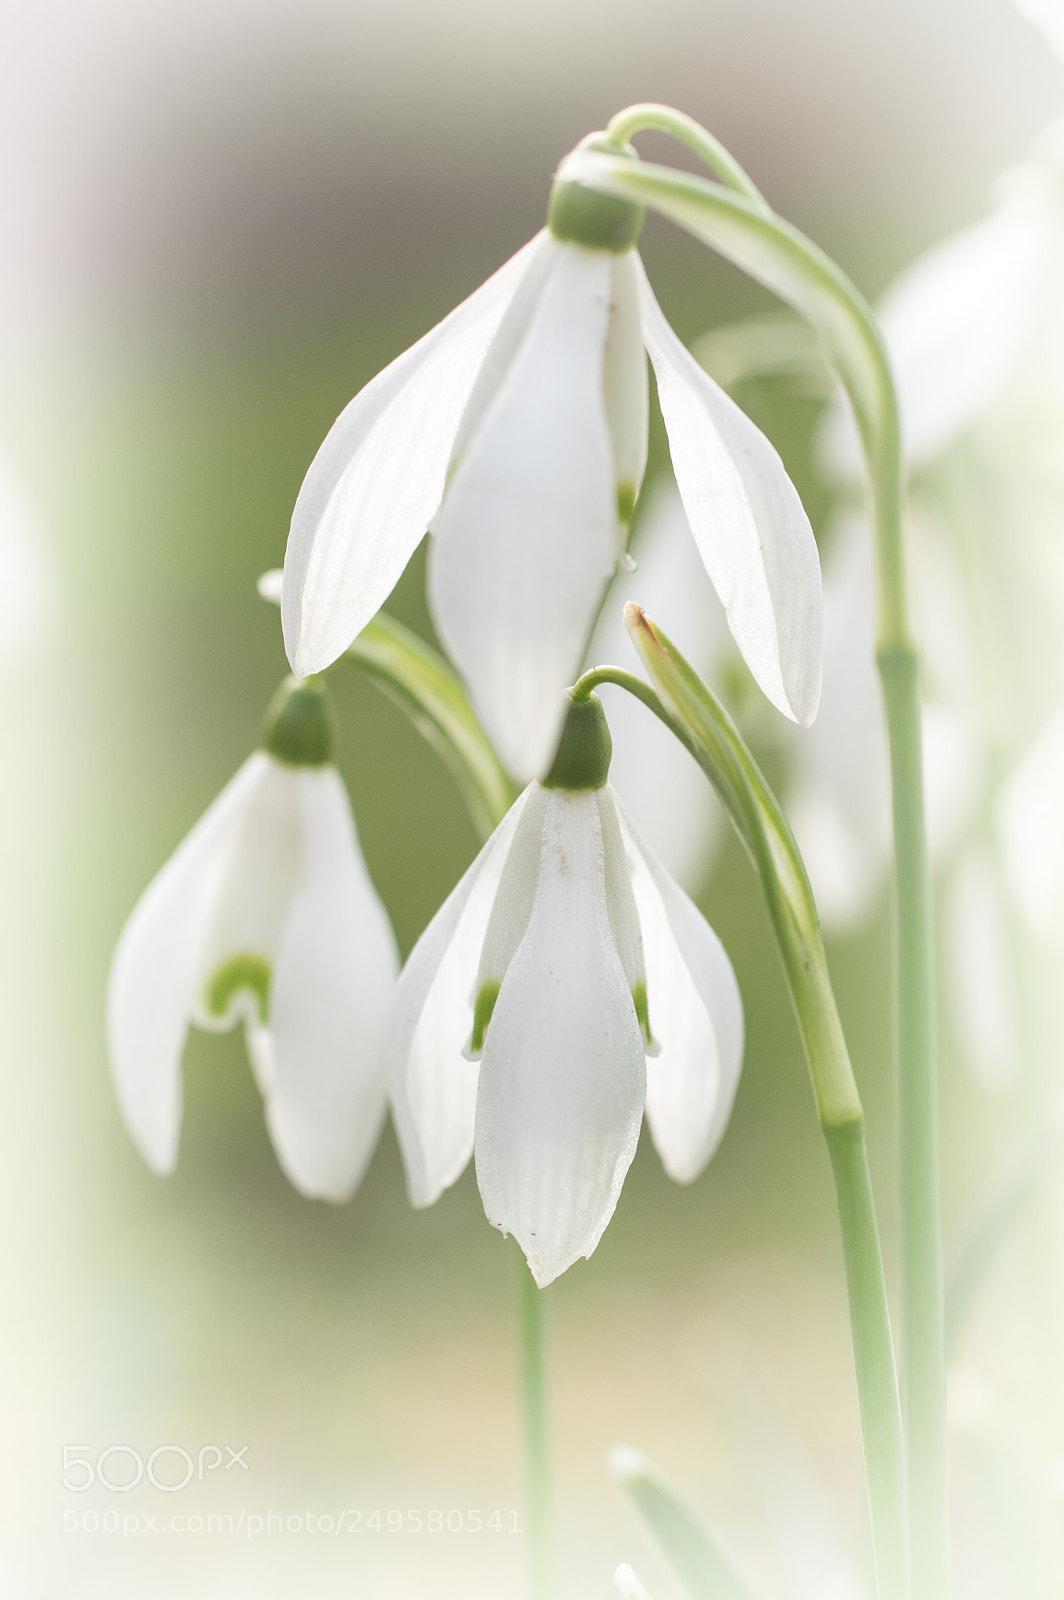 Pentax K-3 sample photo. Yet more snowdrops photography